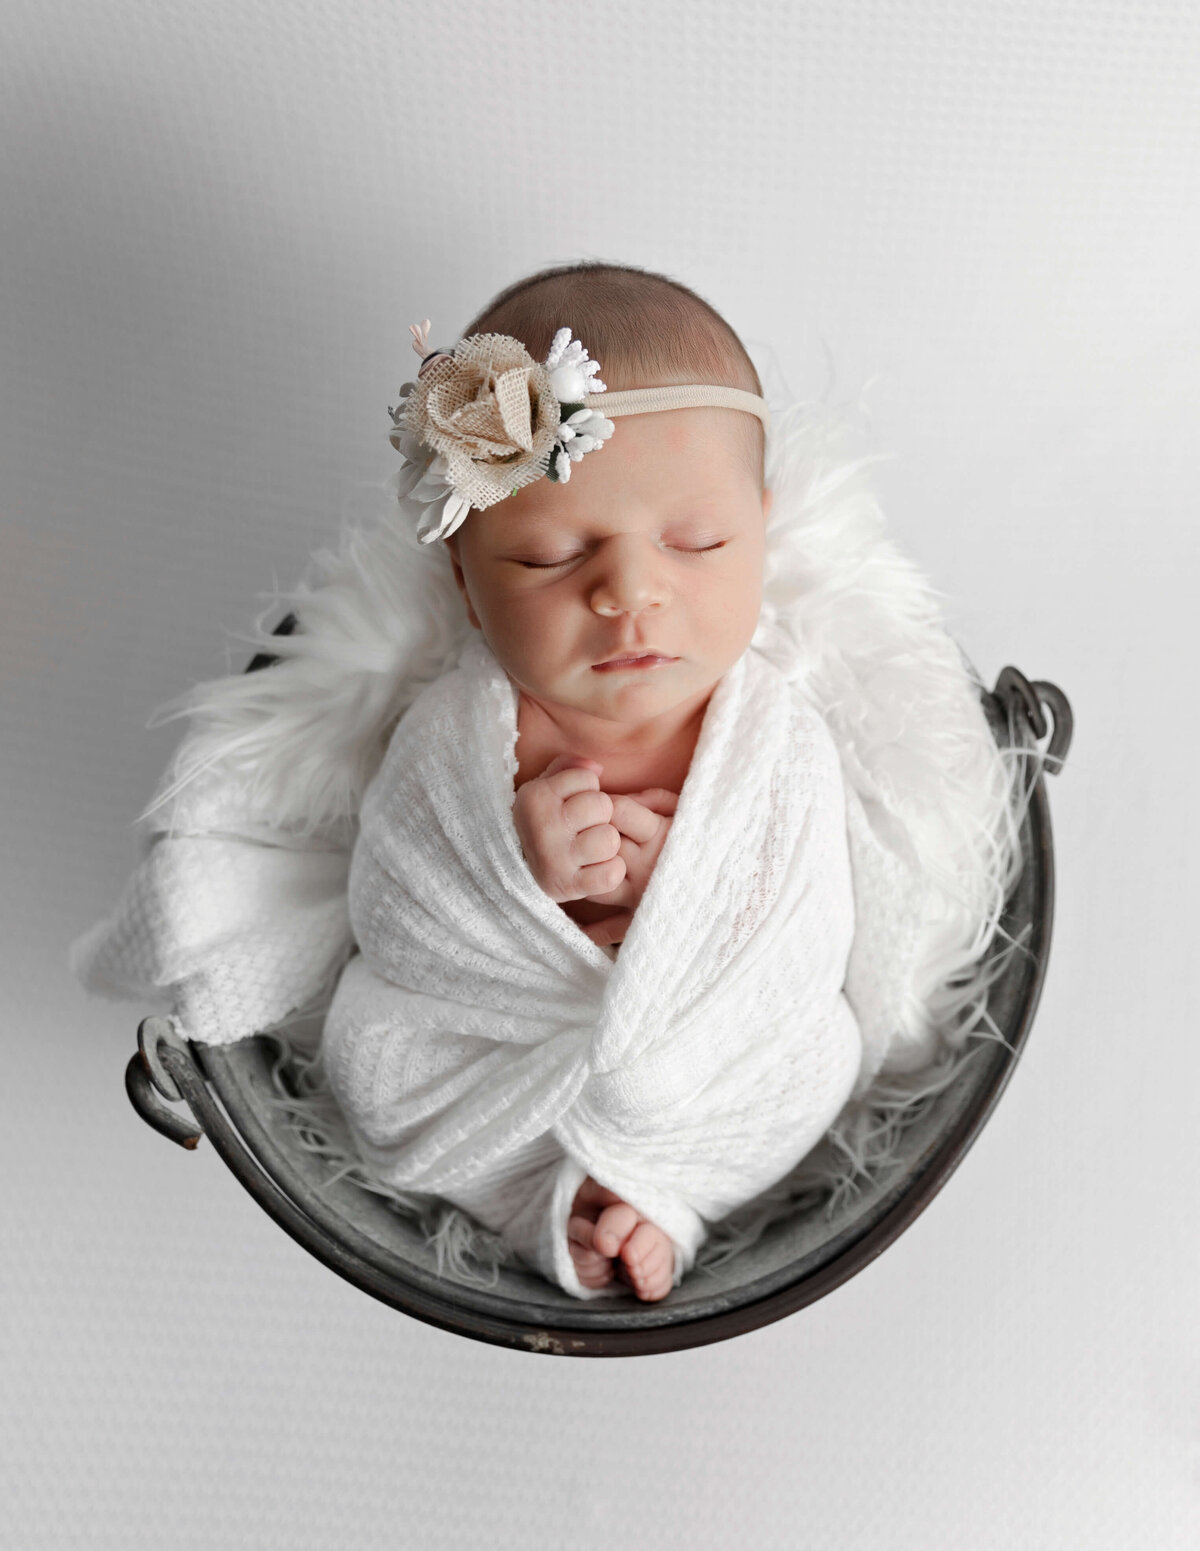 Newborn portrait of a baby girl in a bucket in an Erie Pa photography studio